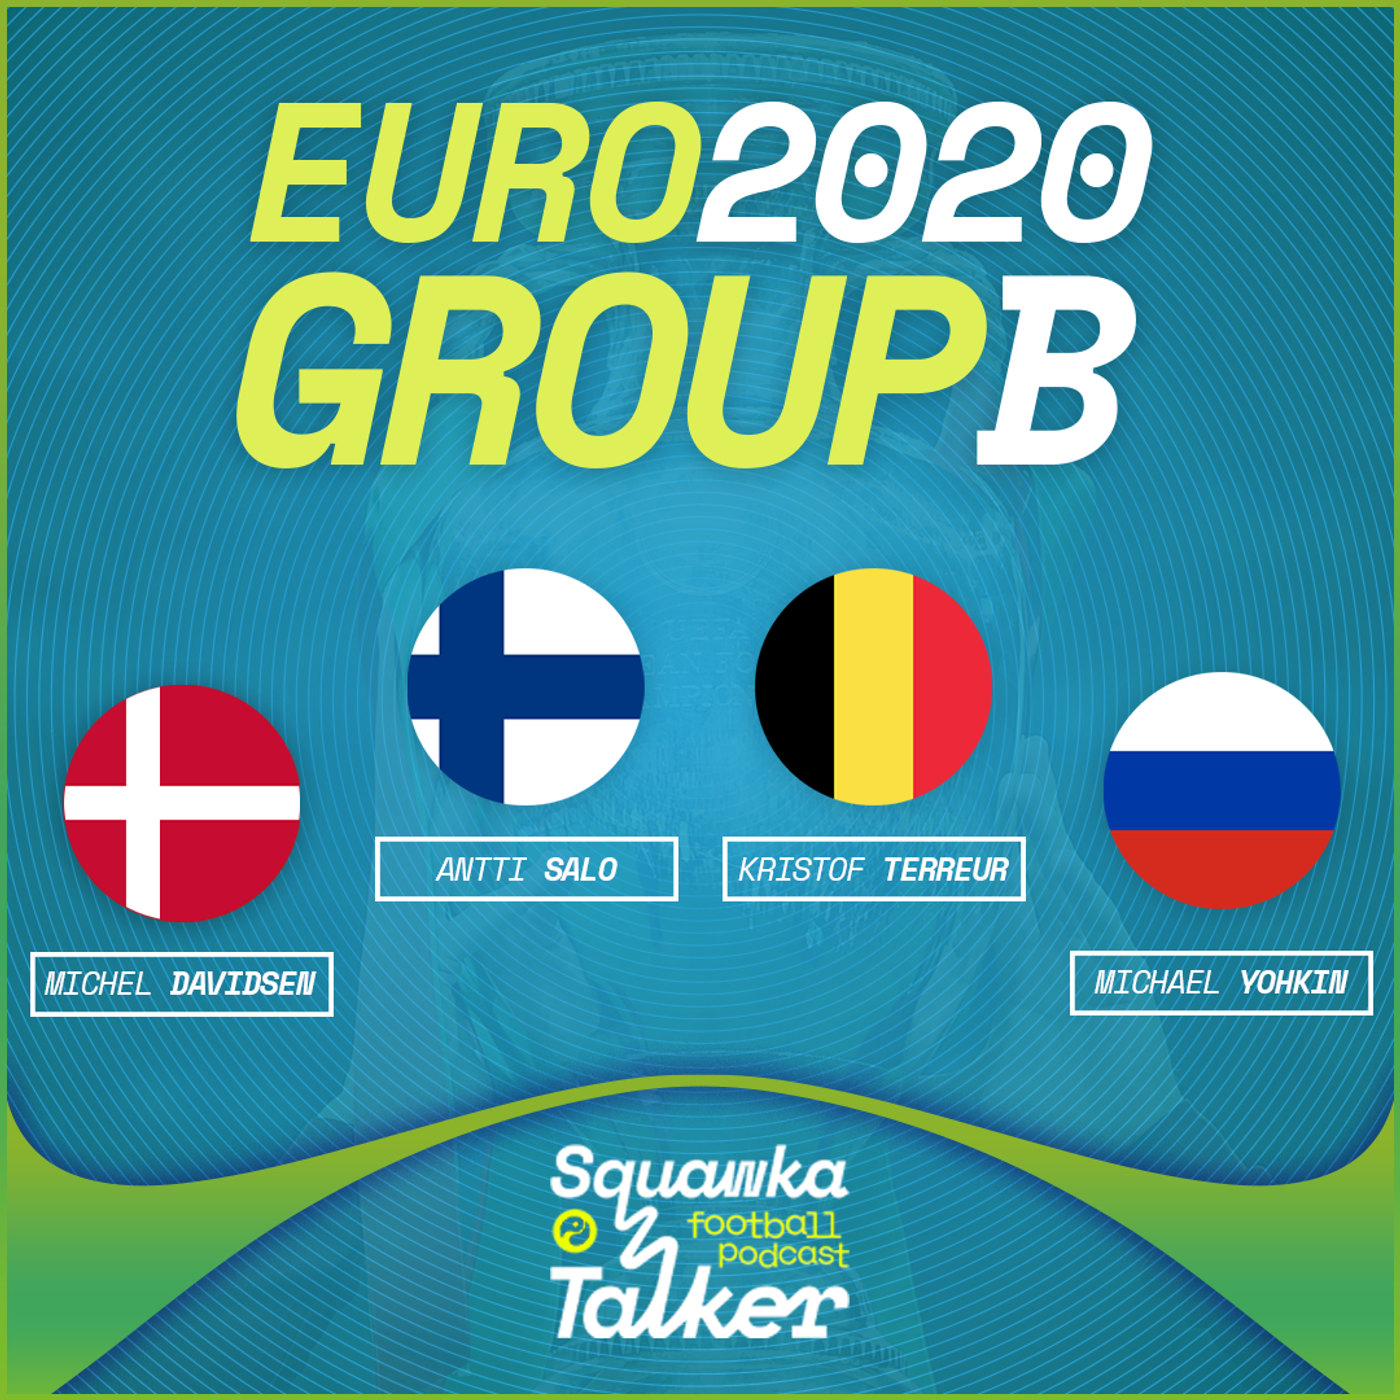 EURO 2020: Your complete guide to Group B